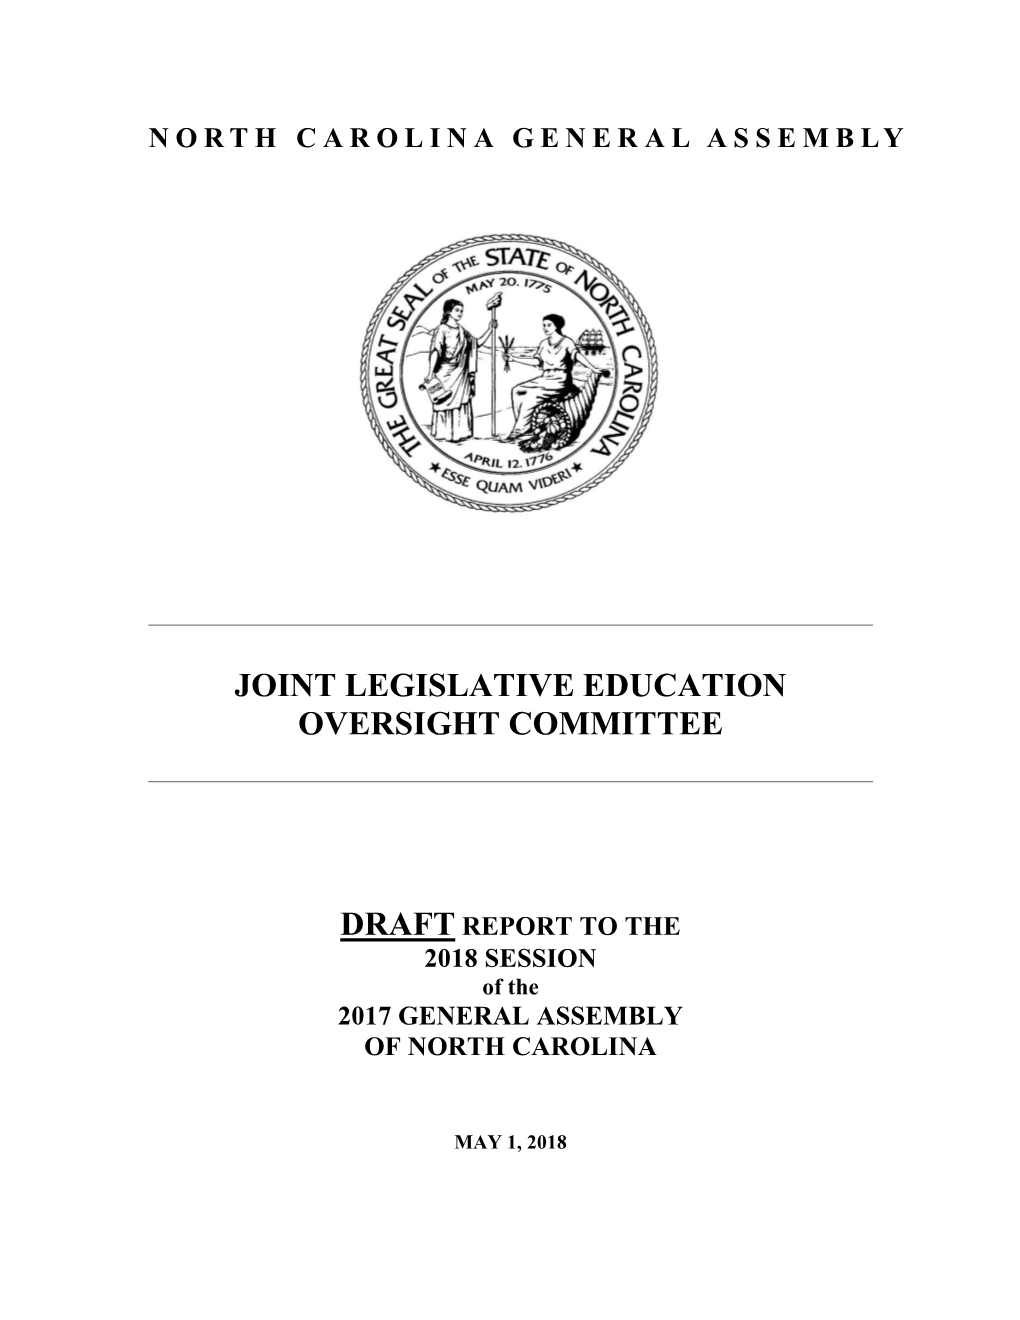 REPORT to the 2018 SESSION of the 2017 GENERAL ASSEMBLY of NORTH CAROLINA